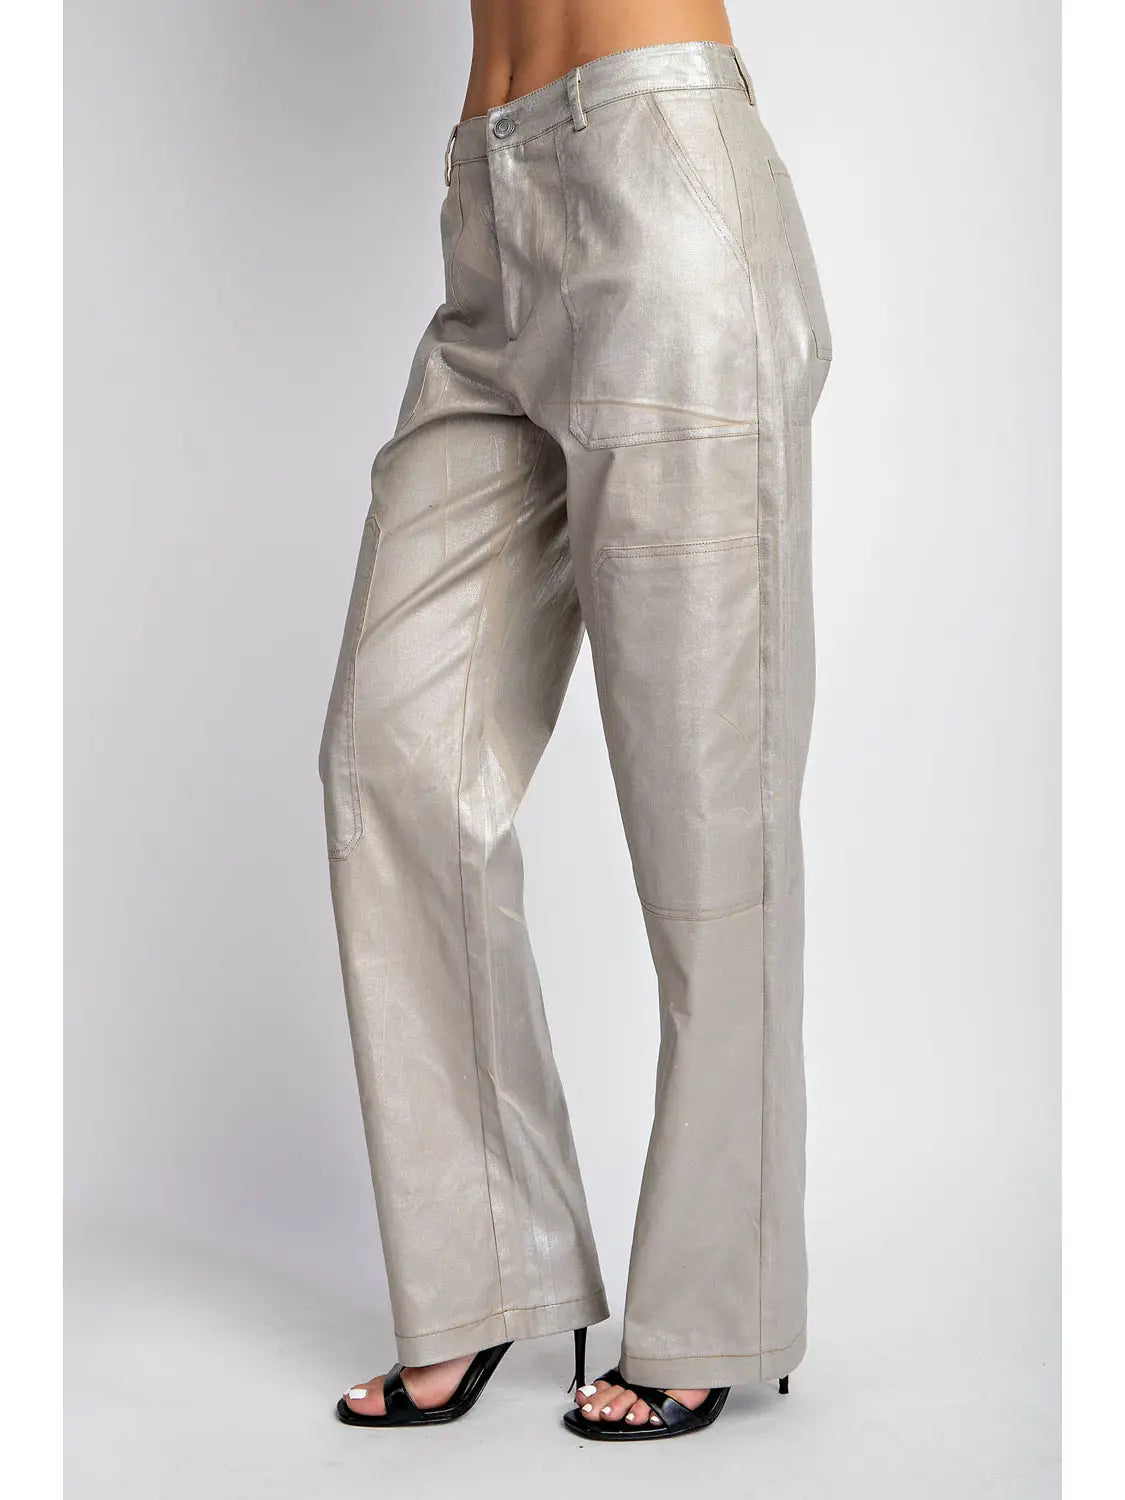 Foiled Twill Fabic Contrast Cargo Pants